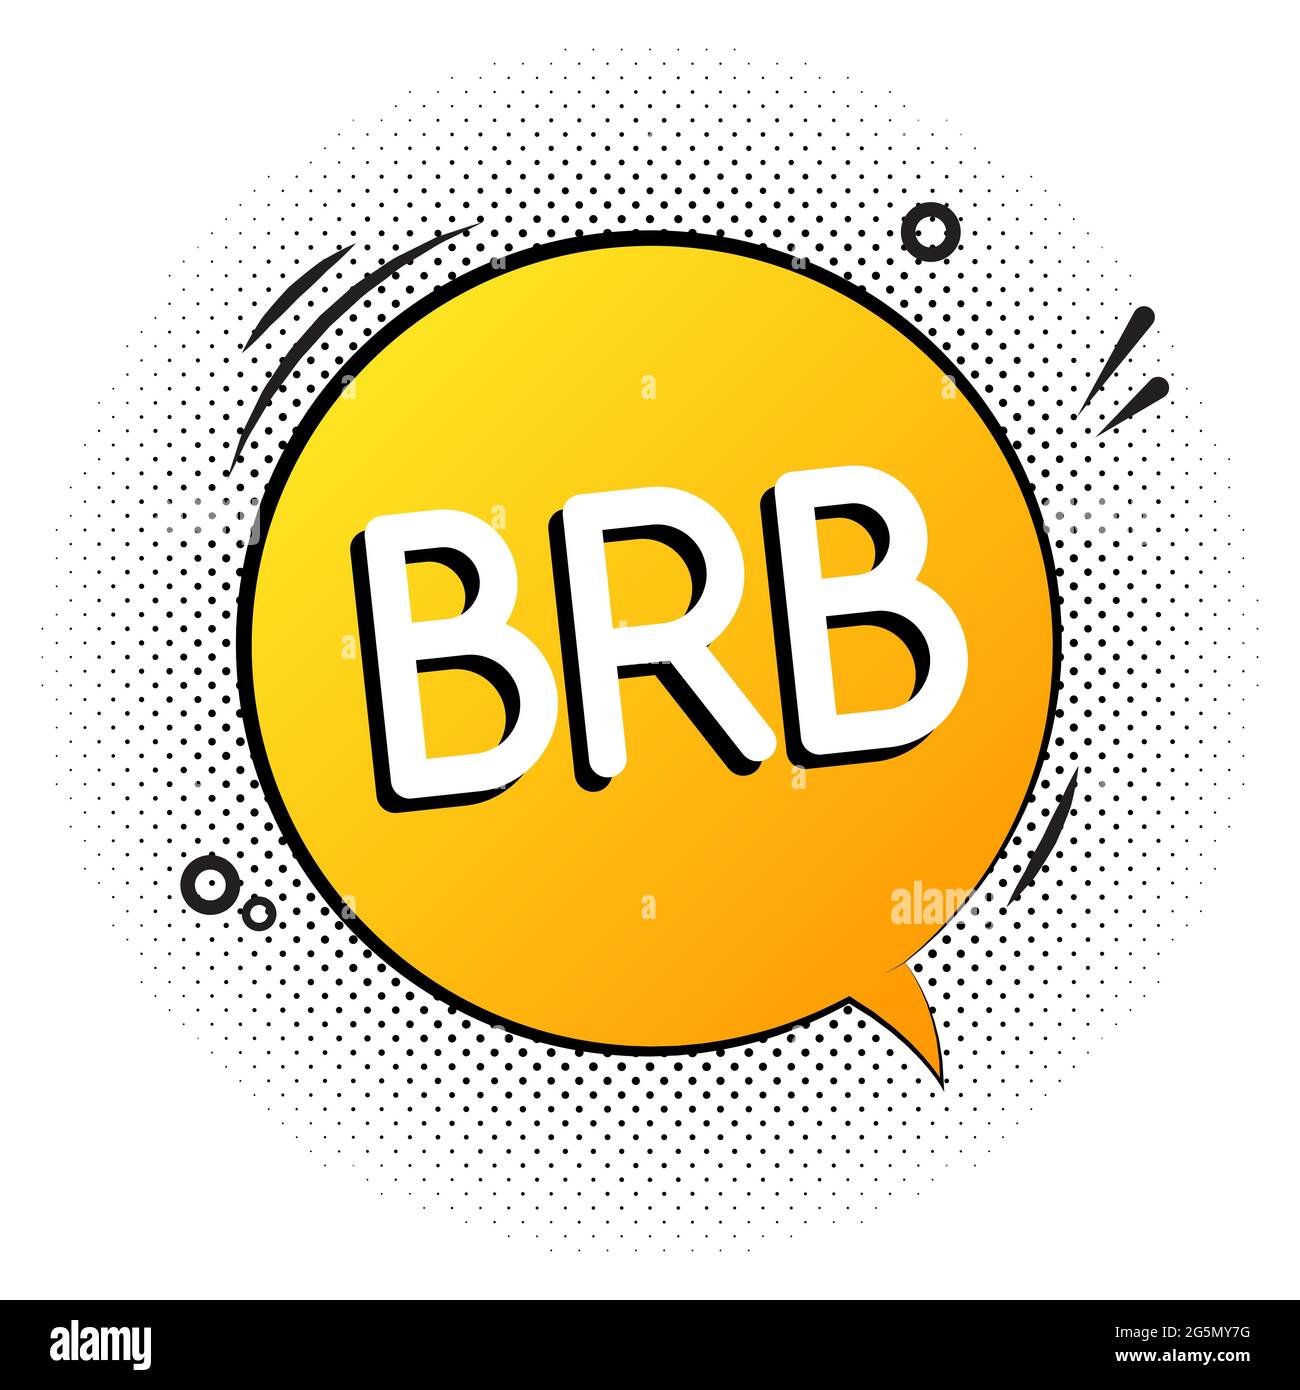 What does (brb) mean? - Definition of (brb) - (brb) stands for Be Right  Back. By